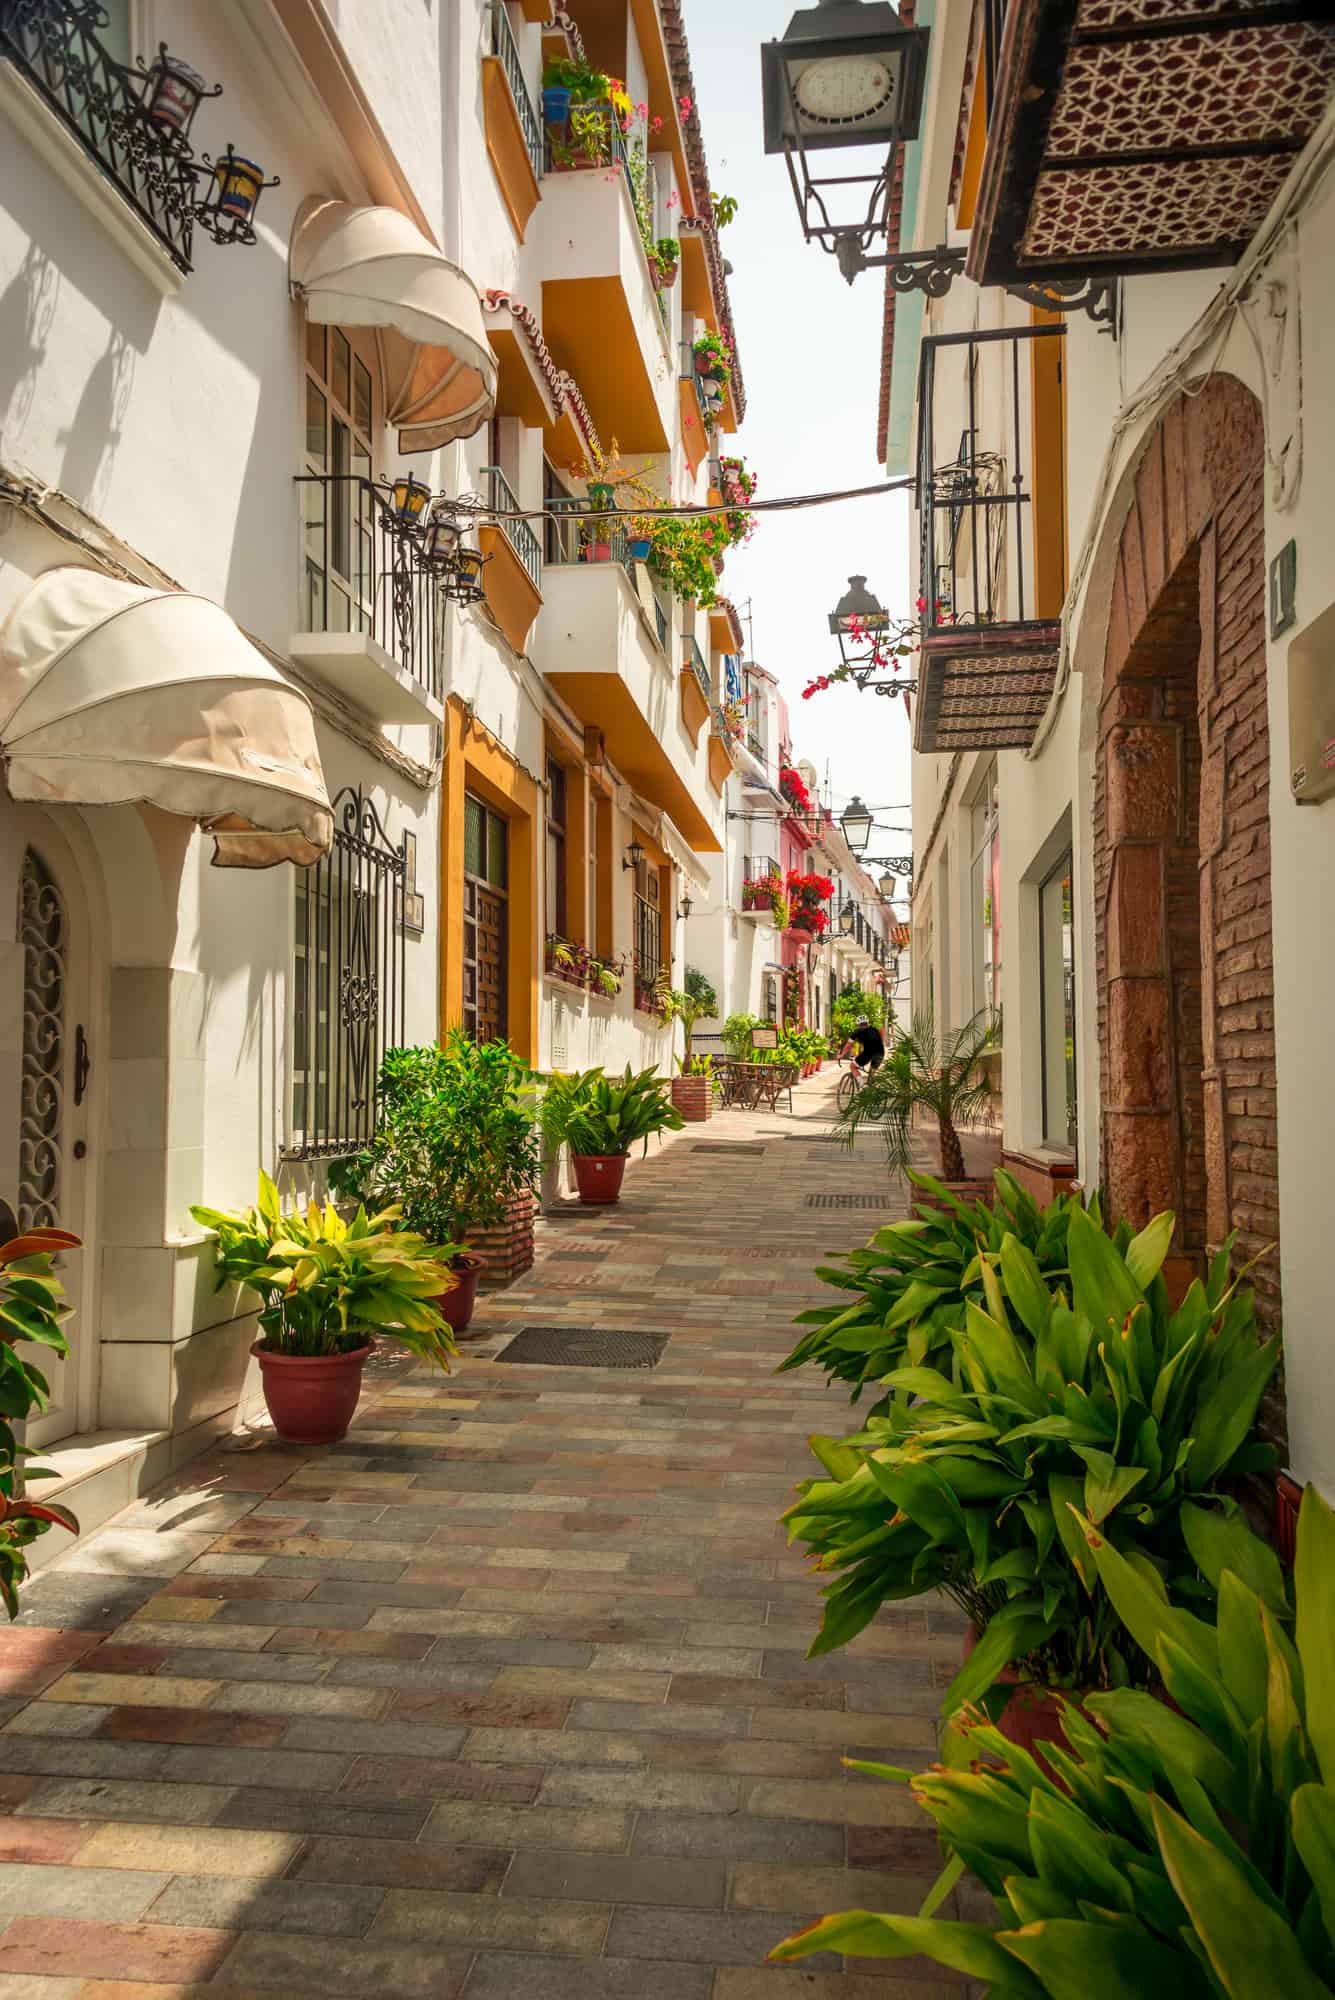 Streets of Marbella, Spanish typical houses, in the region of Andalucia